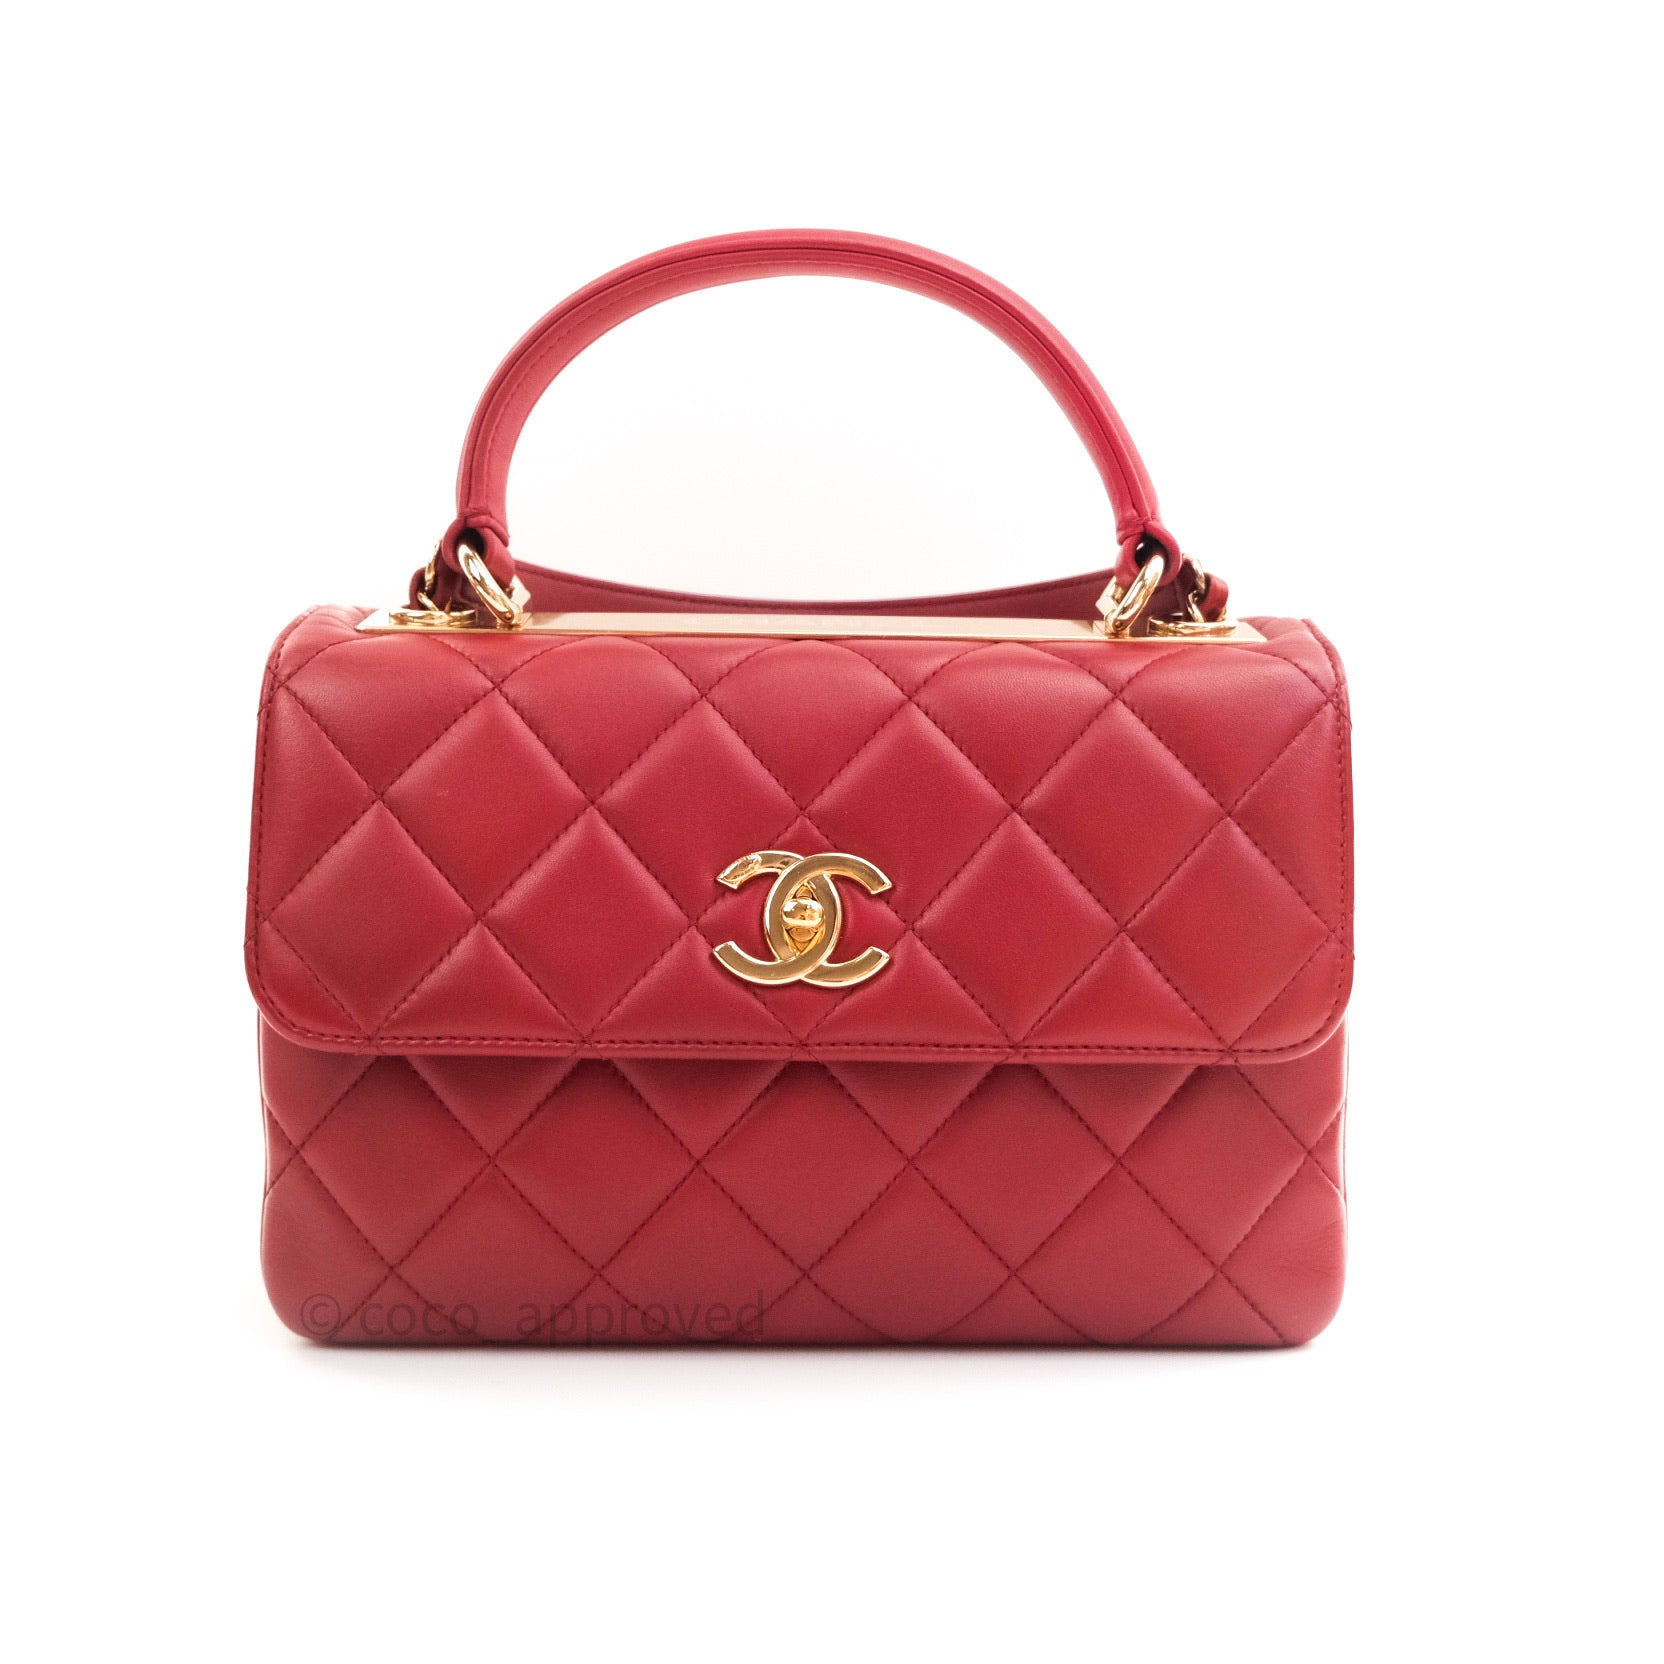 Chanel Women's Red Shoulder Bags